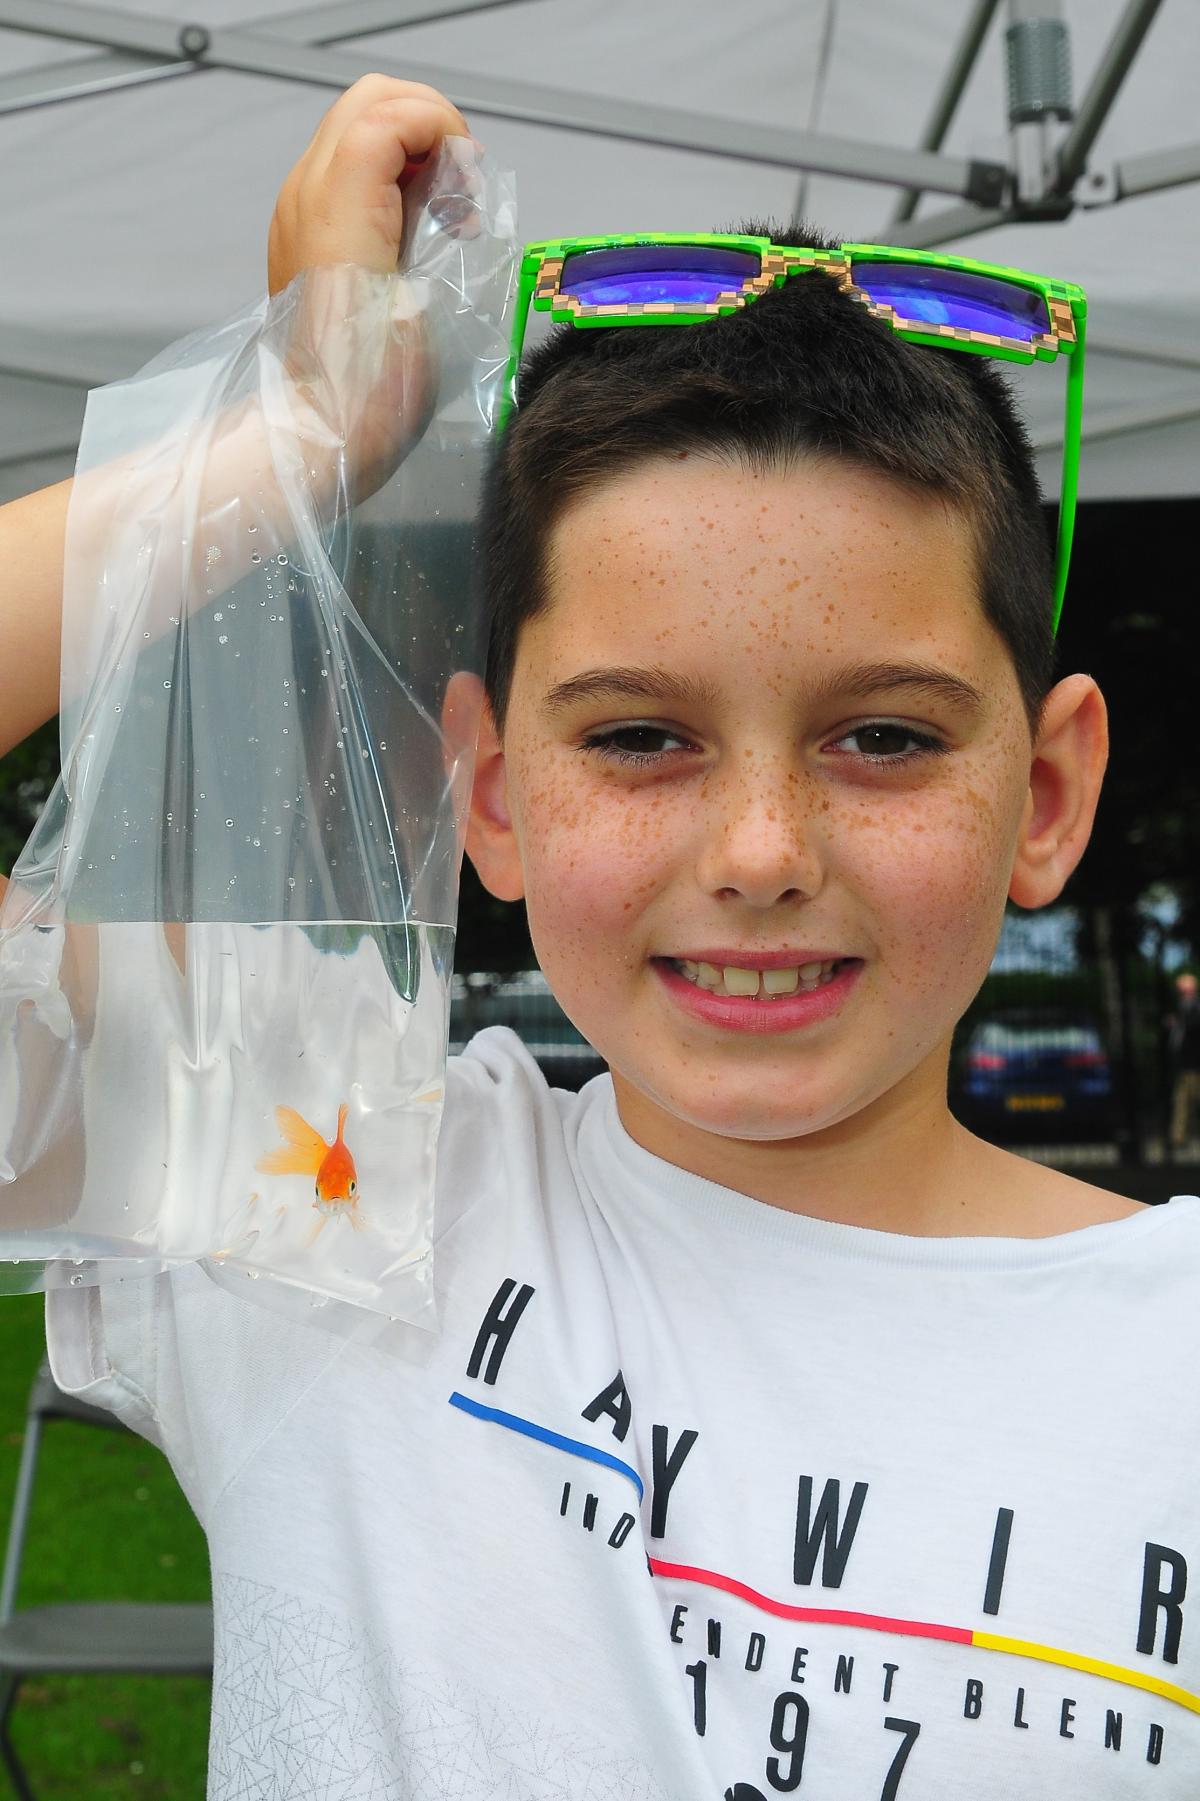 Nine year old Rhydian Jones shows off the gold fish he won at SFS.